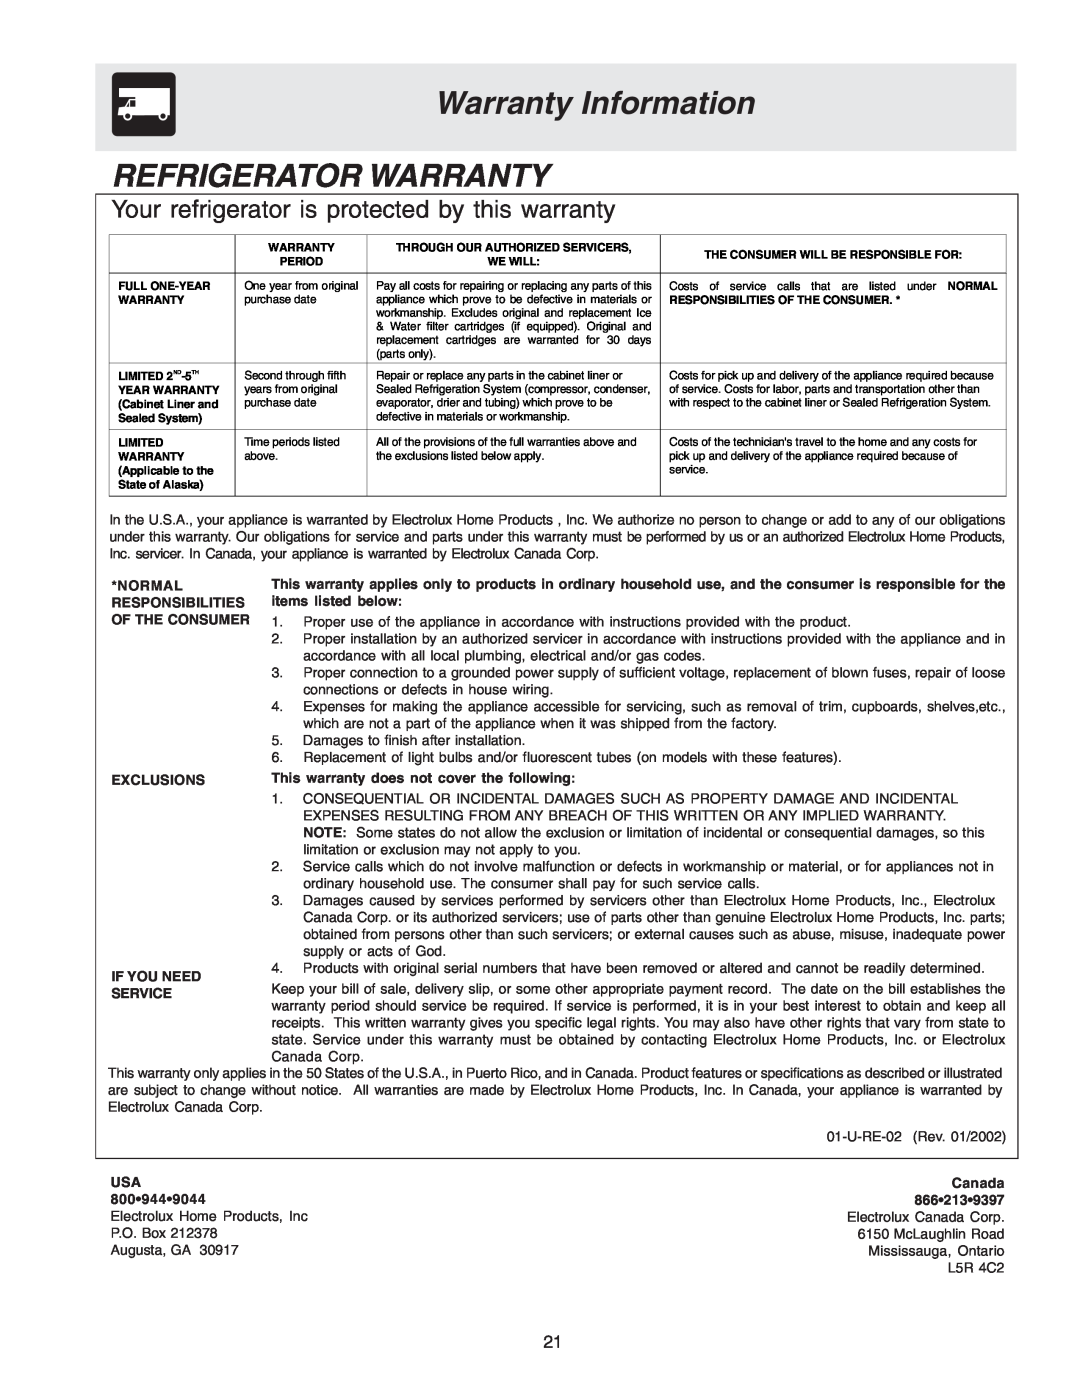 Frigidaire FRS26R2AQ5 Warranty Information REFRIGERATOR WARRANTY, Your refrigerator is protected by this warranty, Canada 